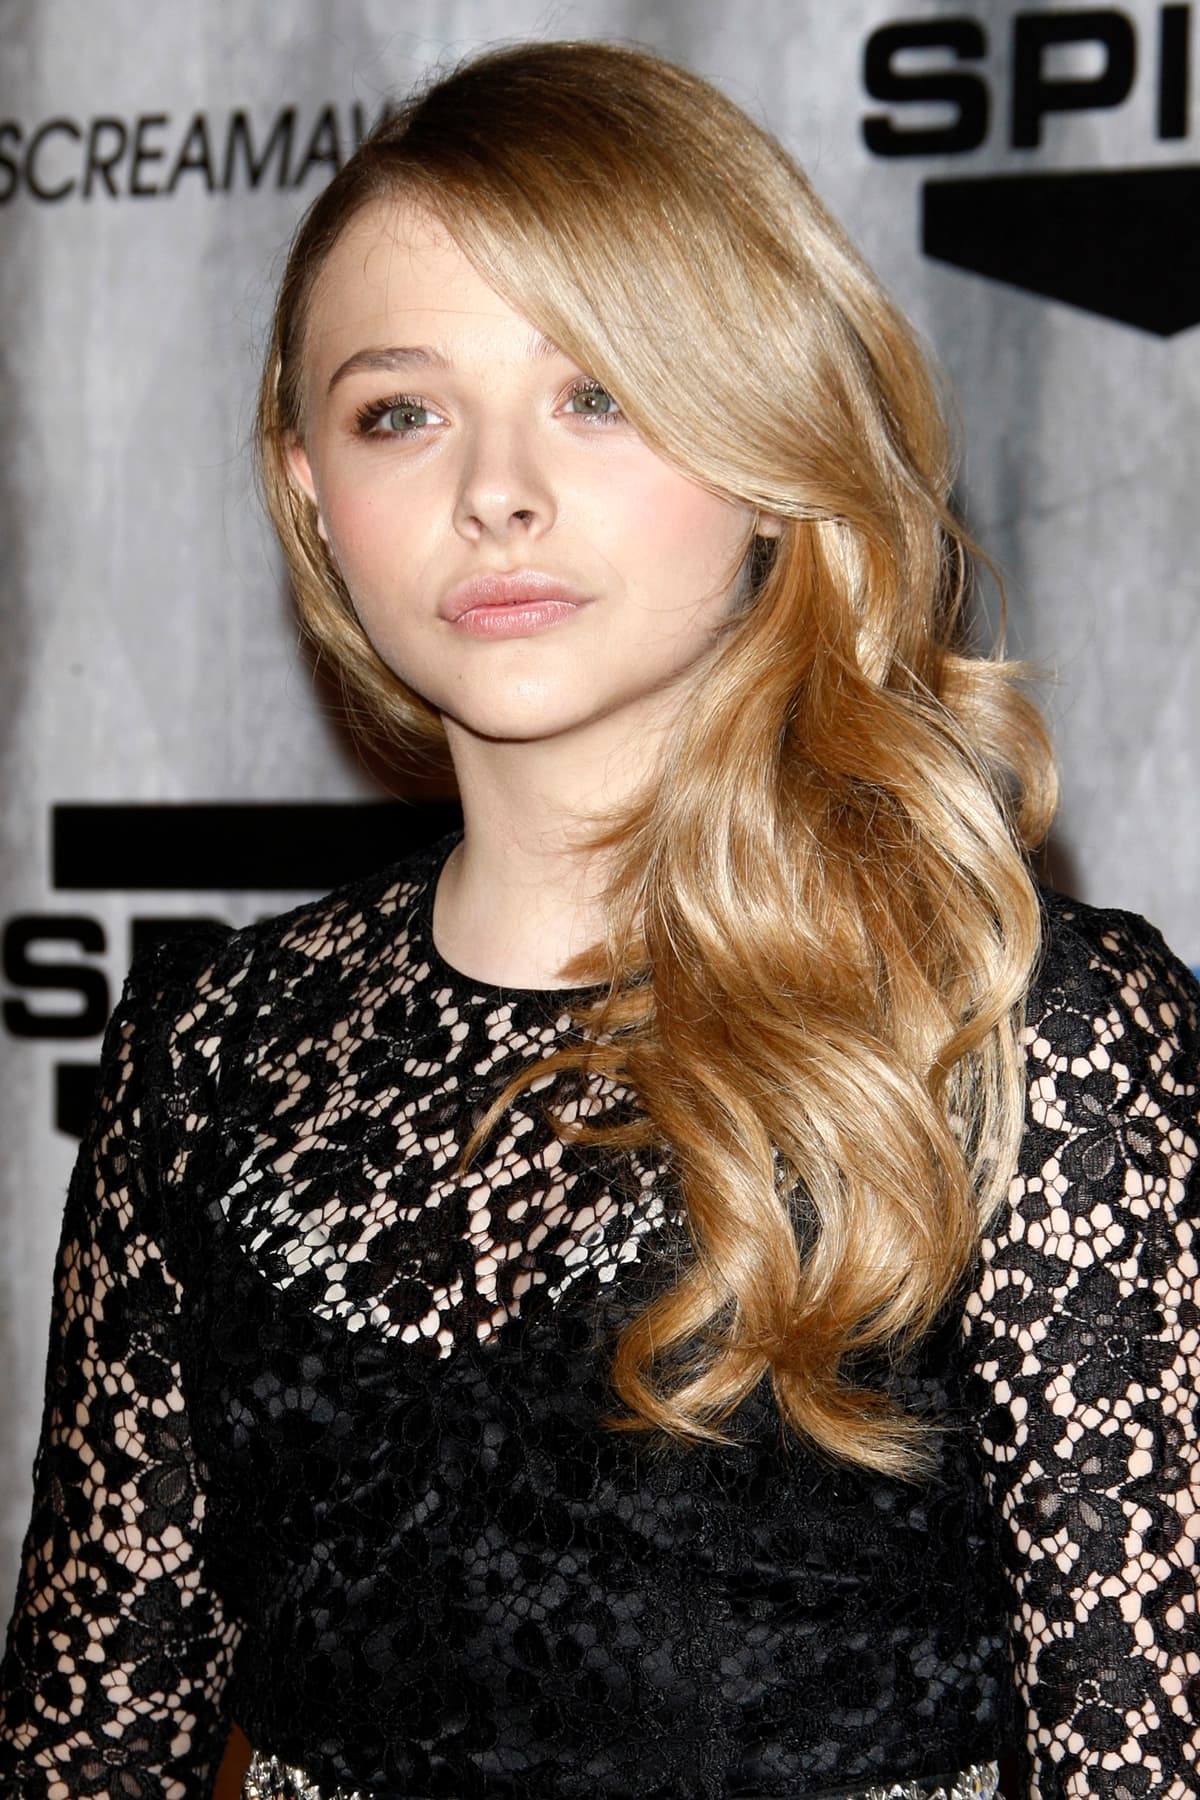 Chloë Grace Moretz, in a Dolce & Gabbana dress, picked up the award for Best Horror Actress for her work in the romantic horror film Let Me In at the Scream Awards 2011